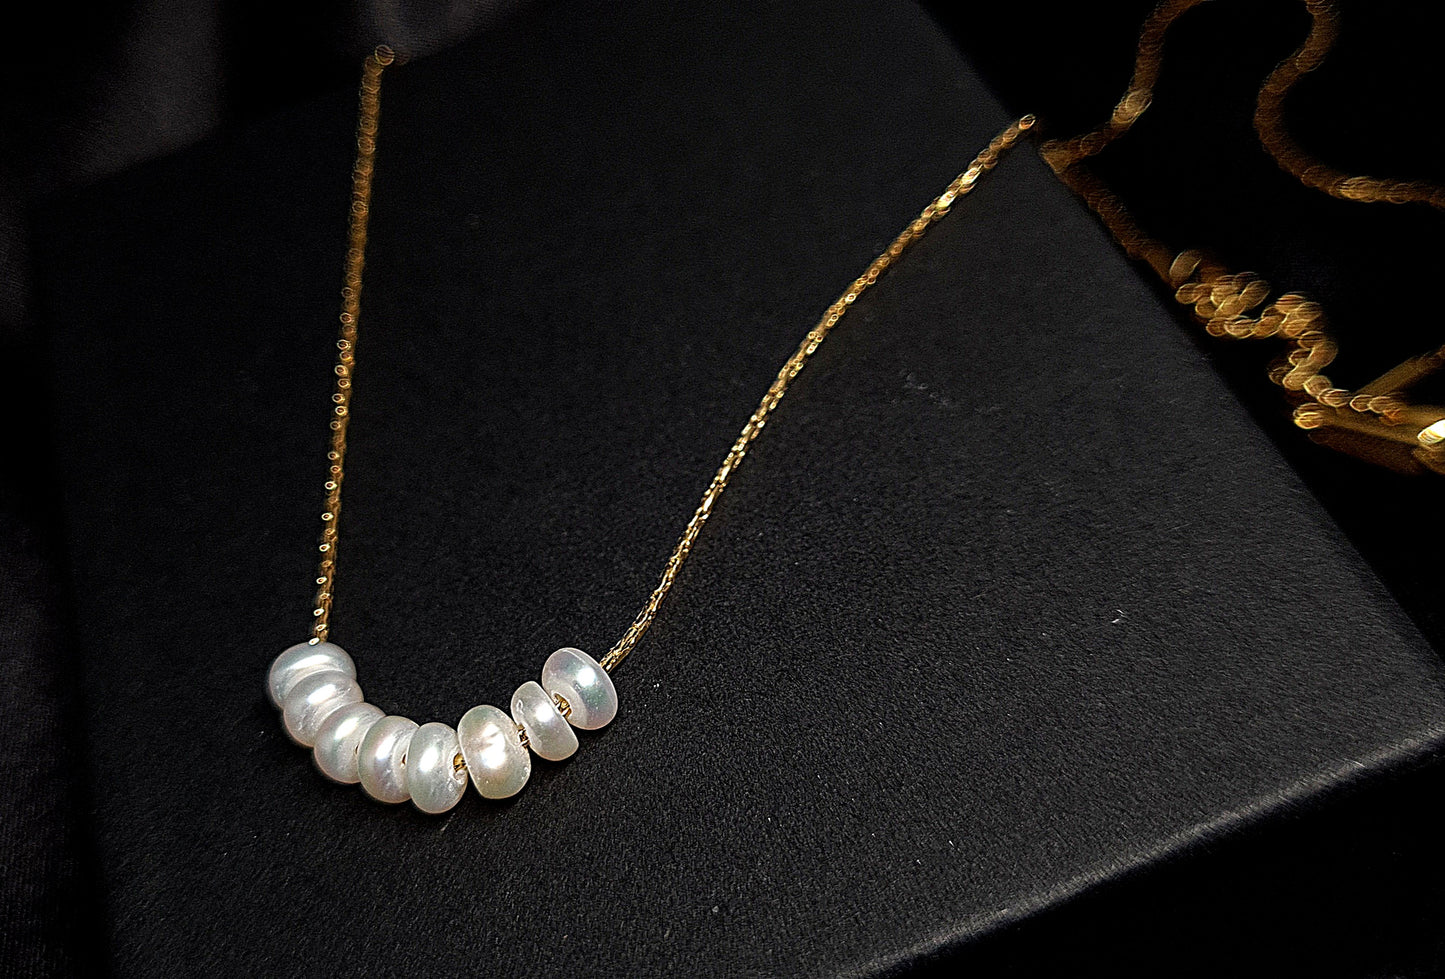 Pearl necklace sitting on black box. The necklace is made of pearls and has a simple design. The pearls are round and white, and they are strung on a black thread. The necklace is sitting on a black box, which provides a nice contrast to the white color of the pearls.